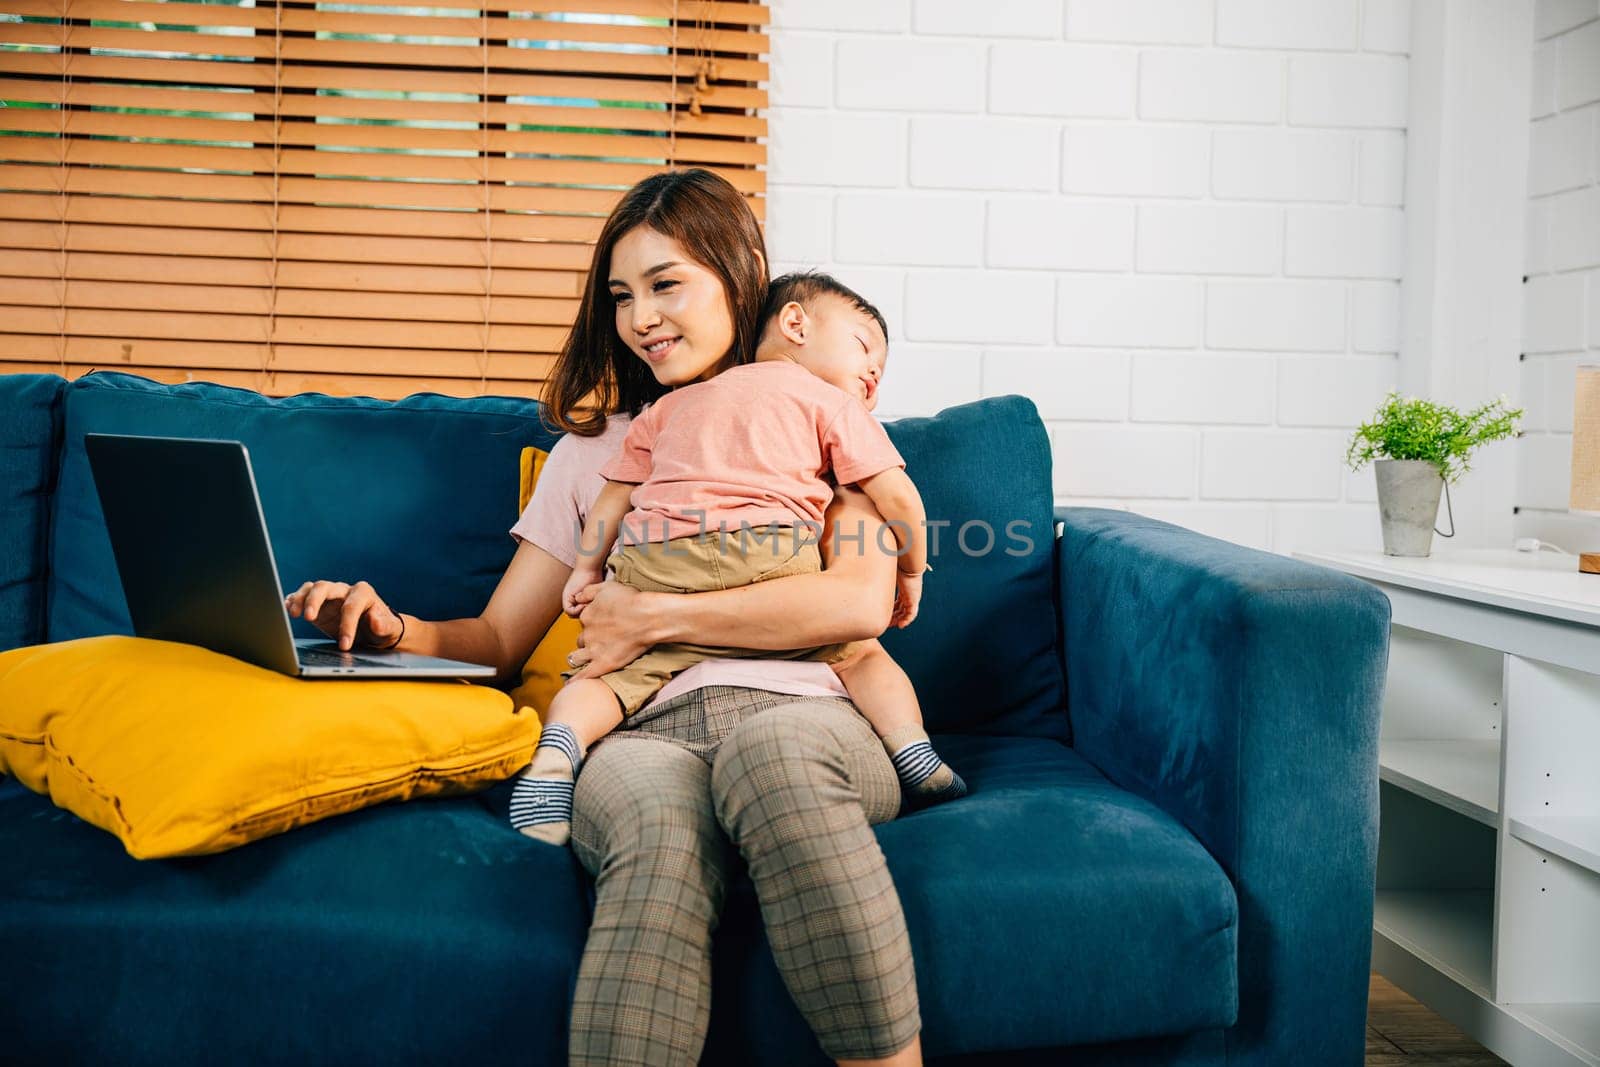 In a cozy home office a businesswoman focuses on her laptop while her baby daughter sleeps beside her. This portrait embodies the bond between a working mother and her child.